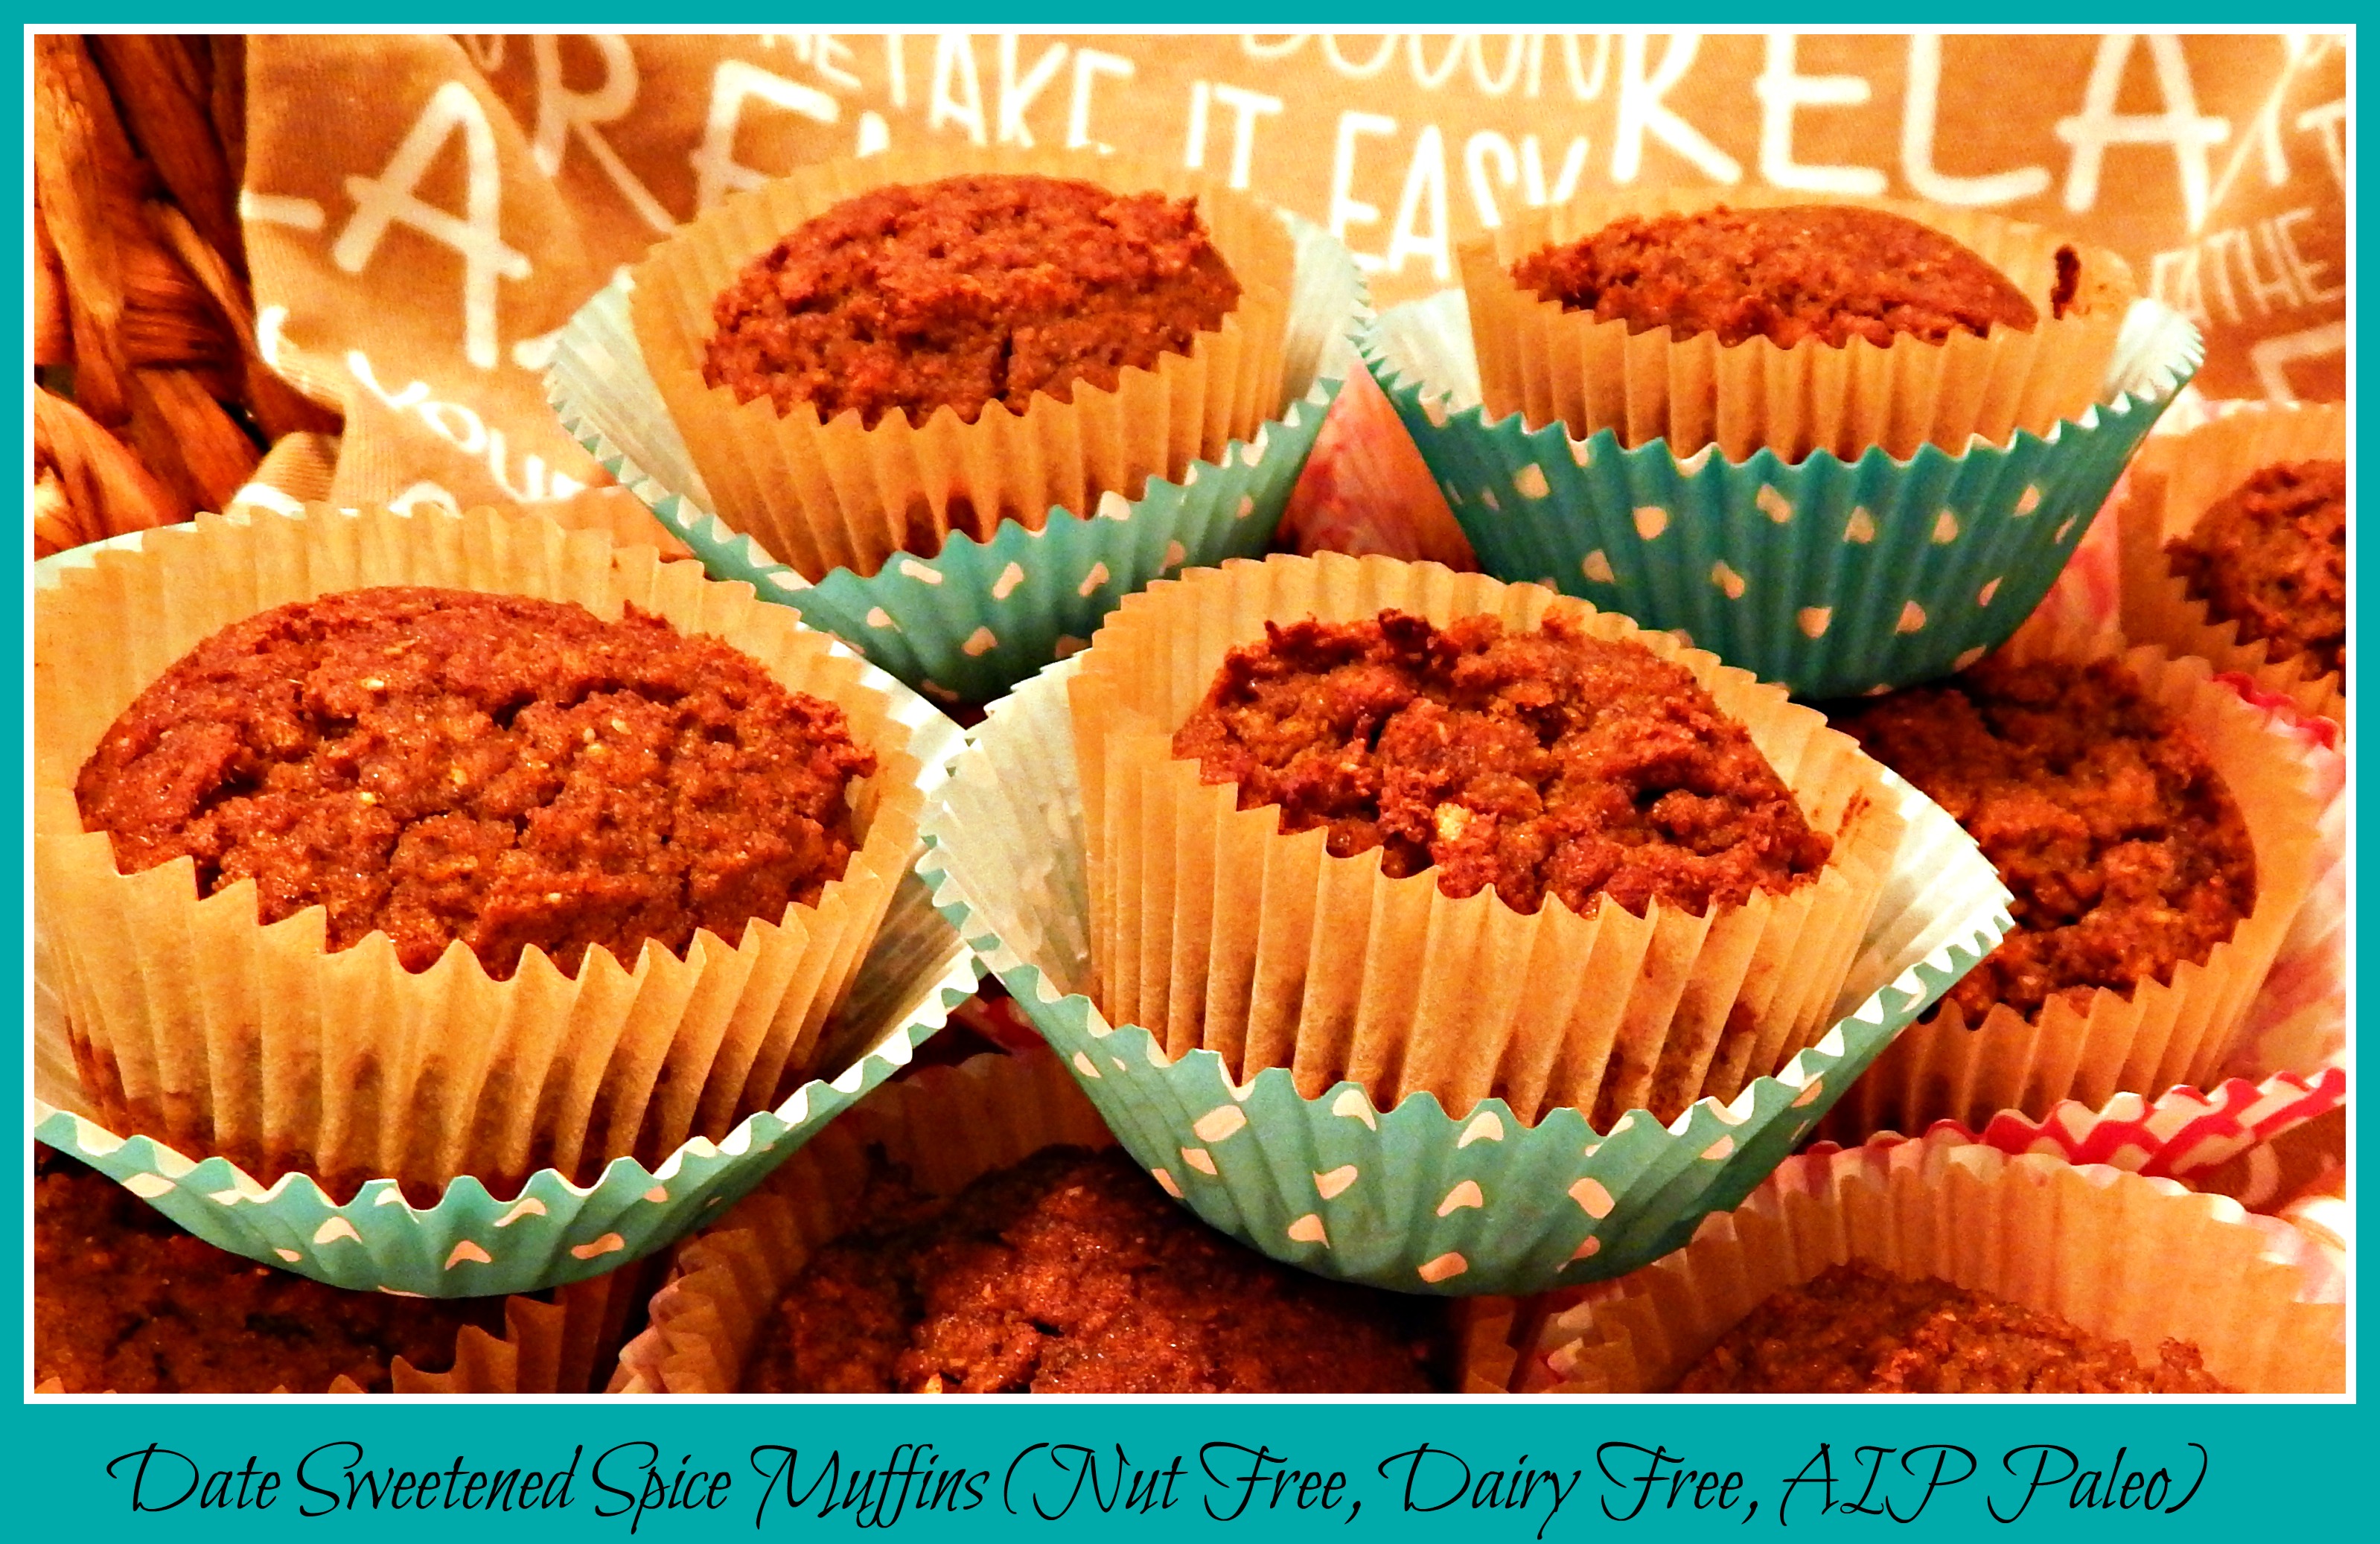 Date Sweetened Spice Muffins (Nut & Egg Free, AIP Paleo